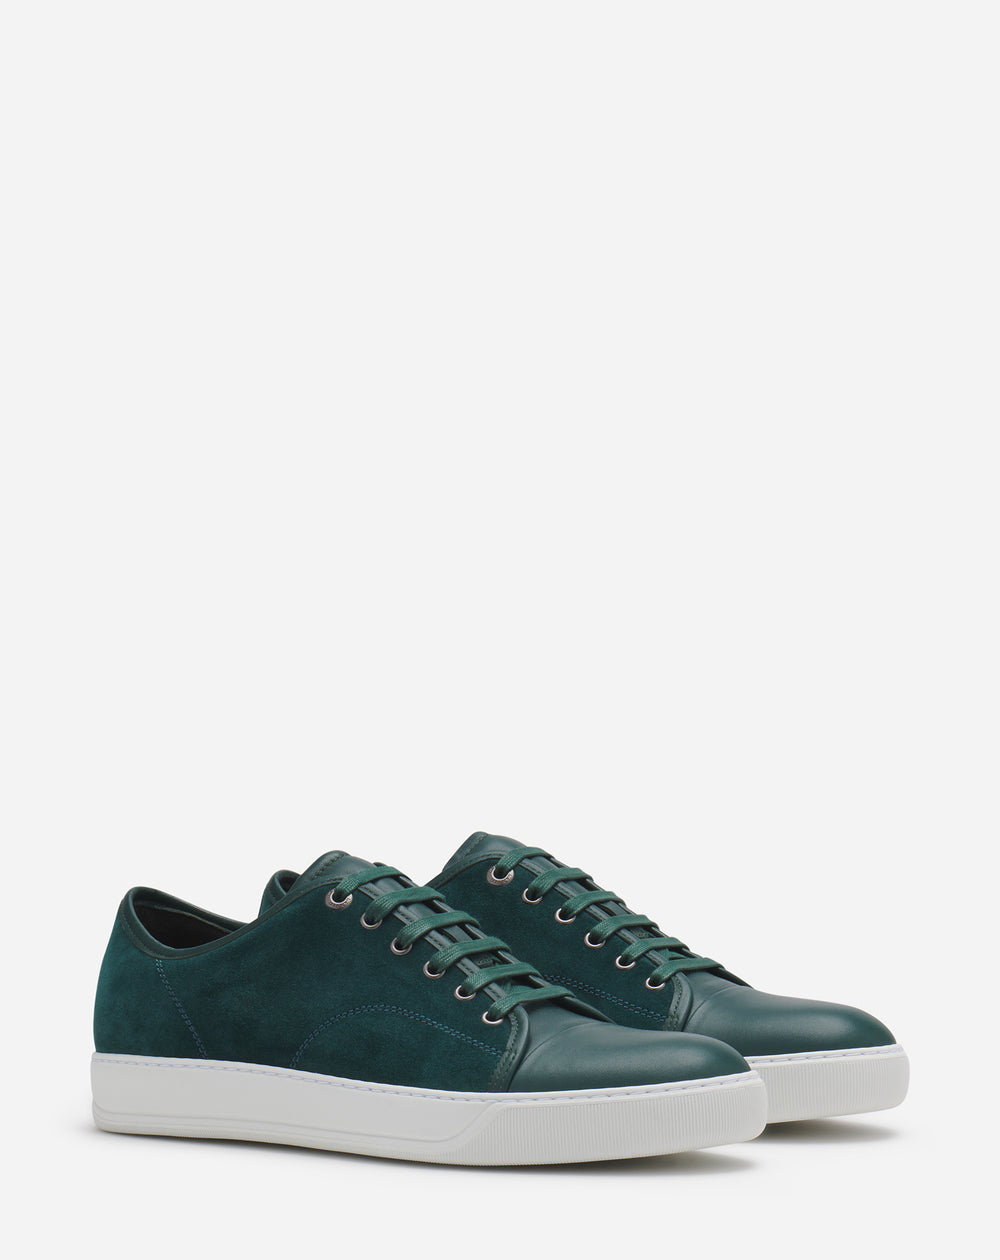 DBB1 LEATHER AND SUEDE SNEAKERS DARK GREEN | Lanvin – LANVIN